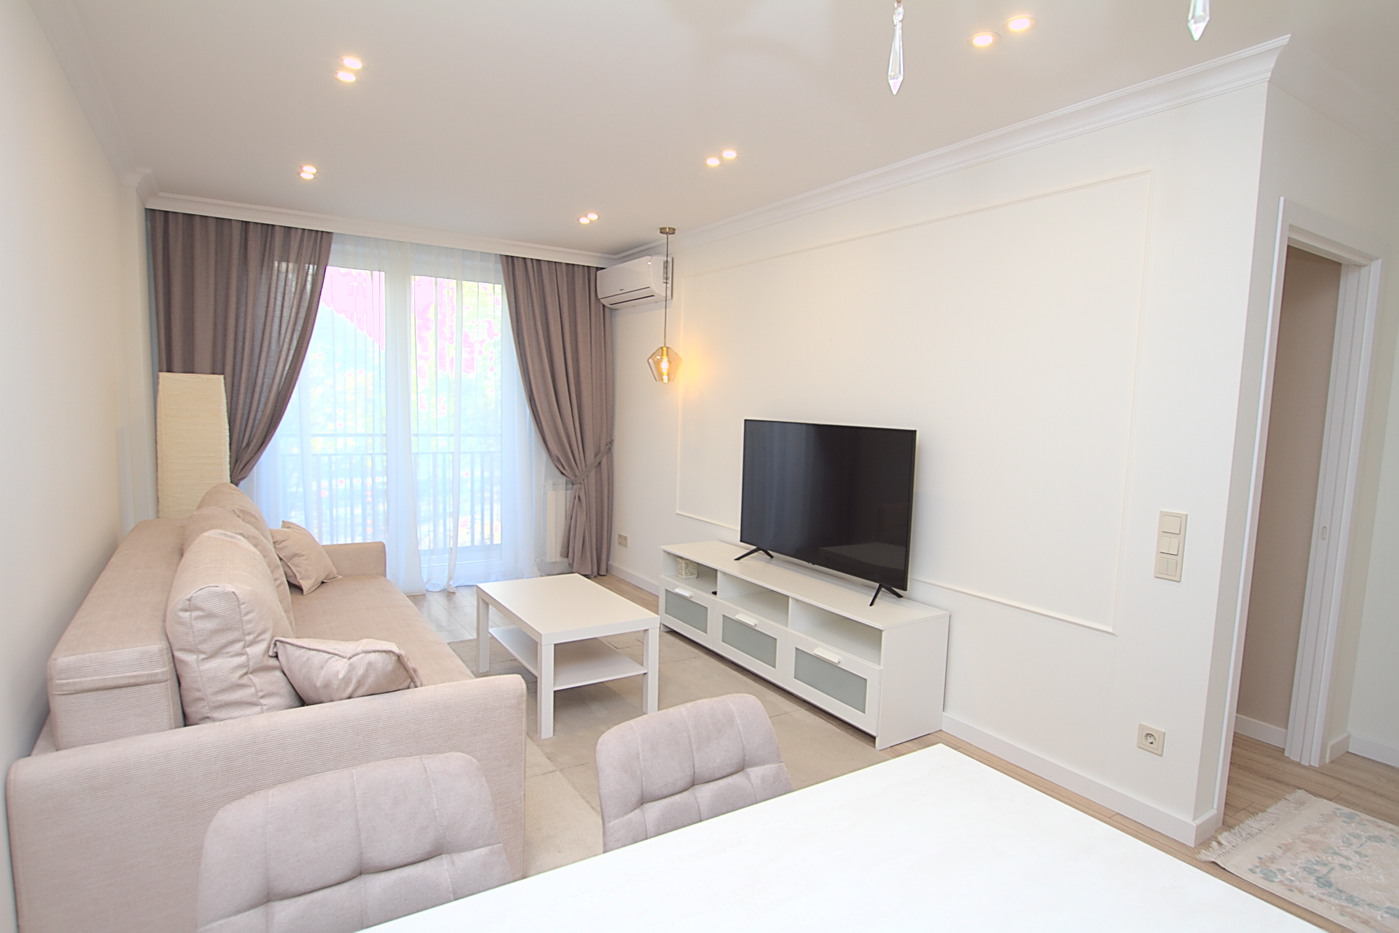 New residence in Chisinau city center: 2 rooms, 1 bedroom, 55 m²